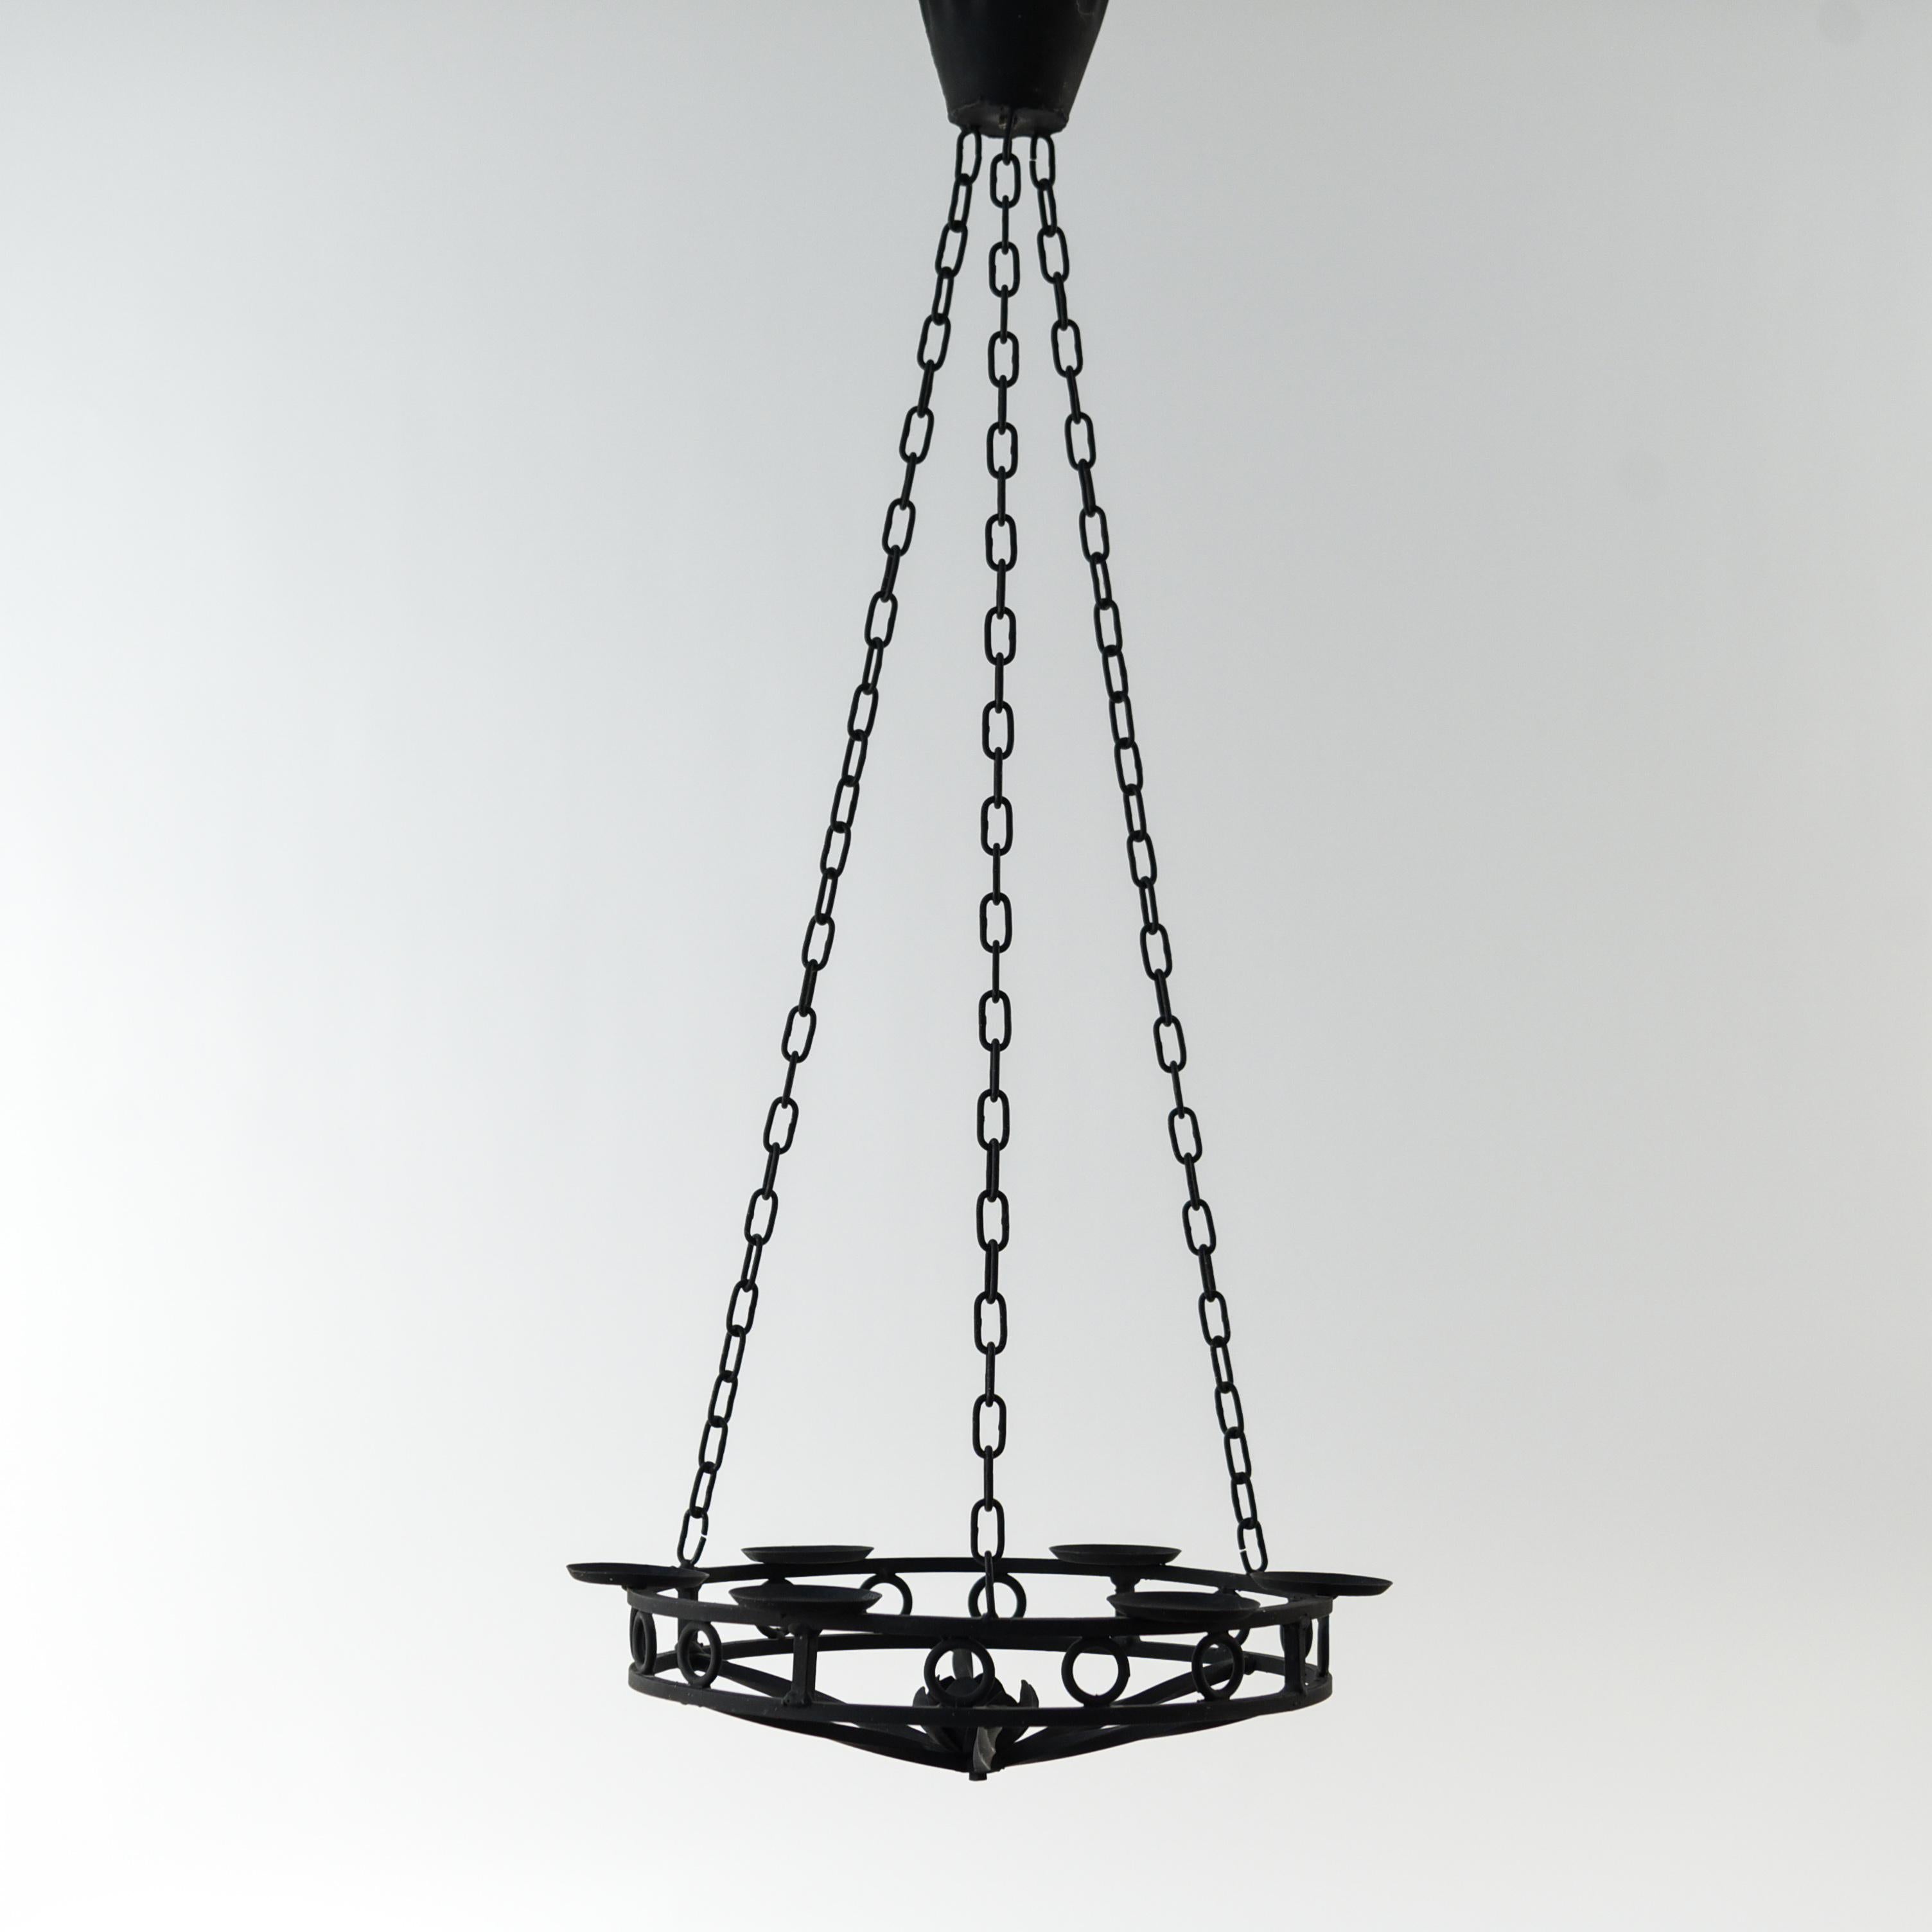 This Danish chandelier is from the 1970s. This piece has six platforms to hold candles and has a beautiful rustic appearance.